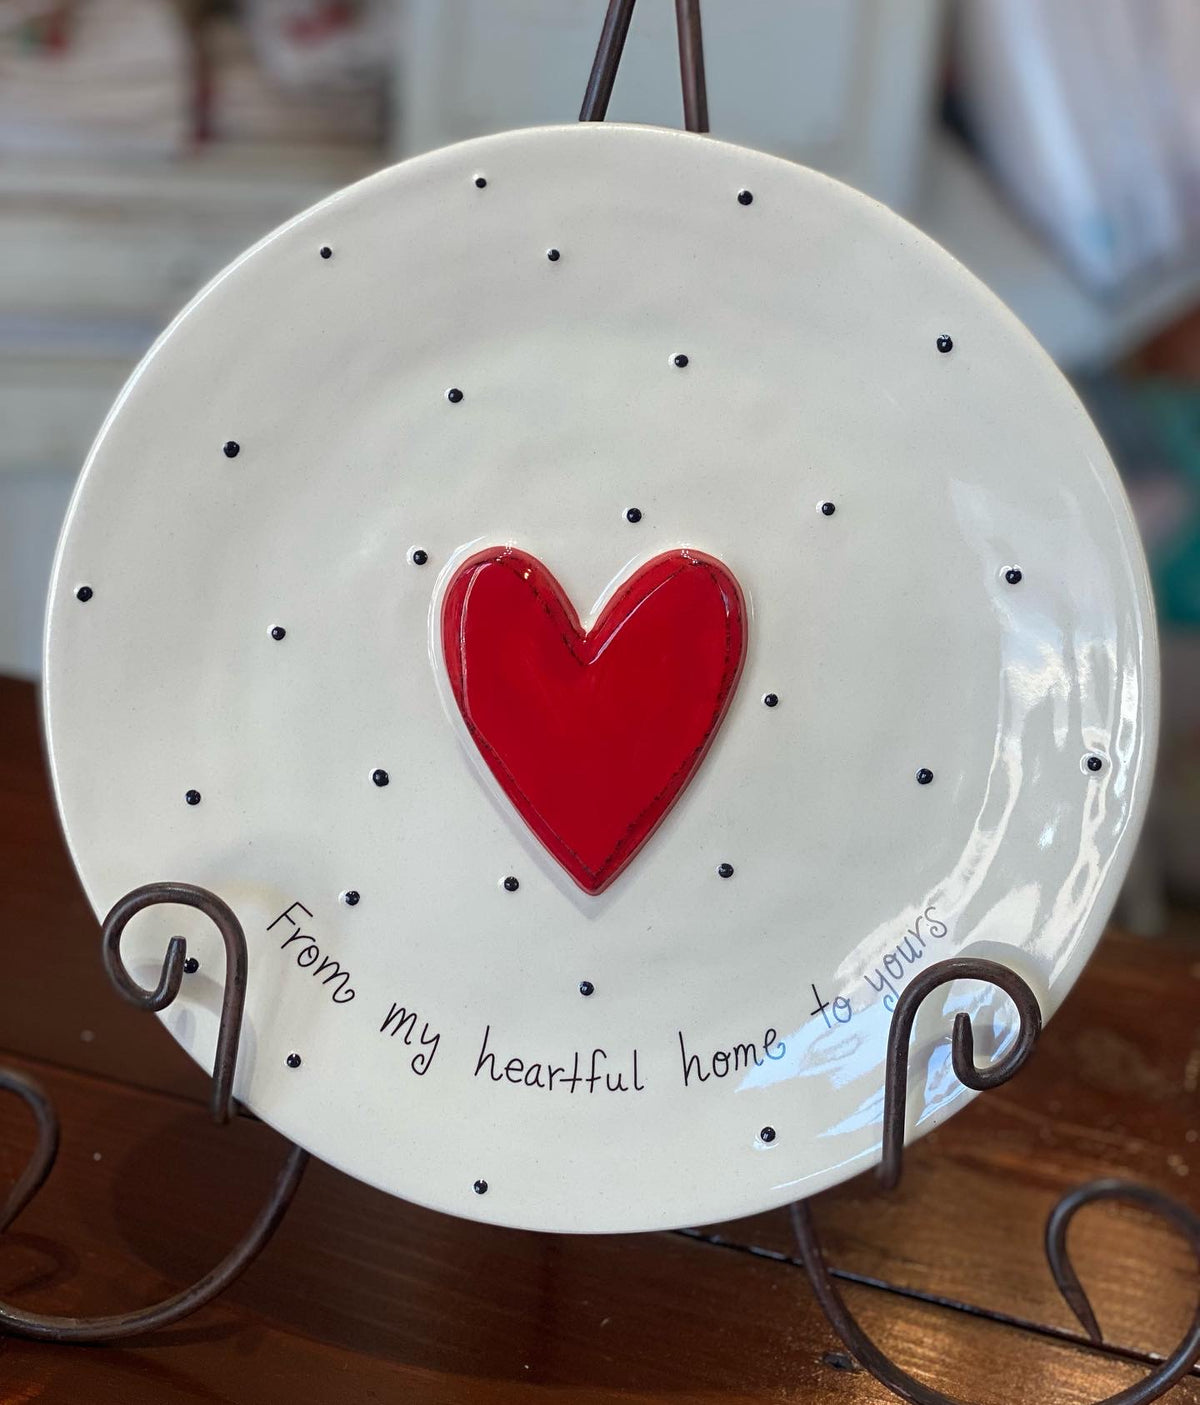 Heartful Giving Plates